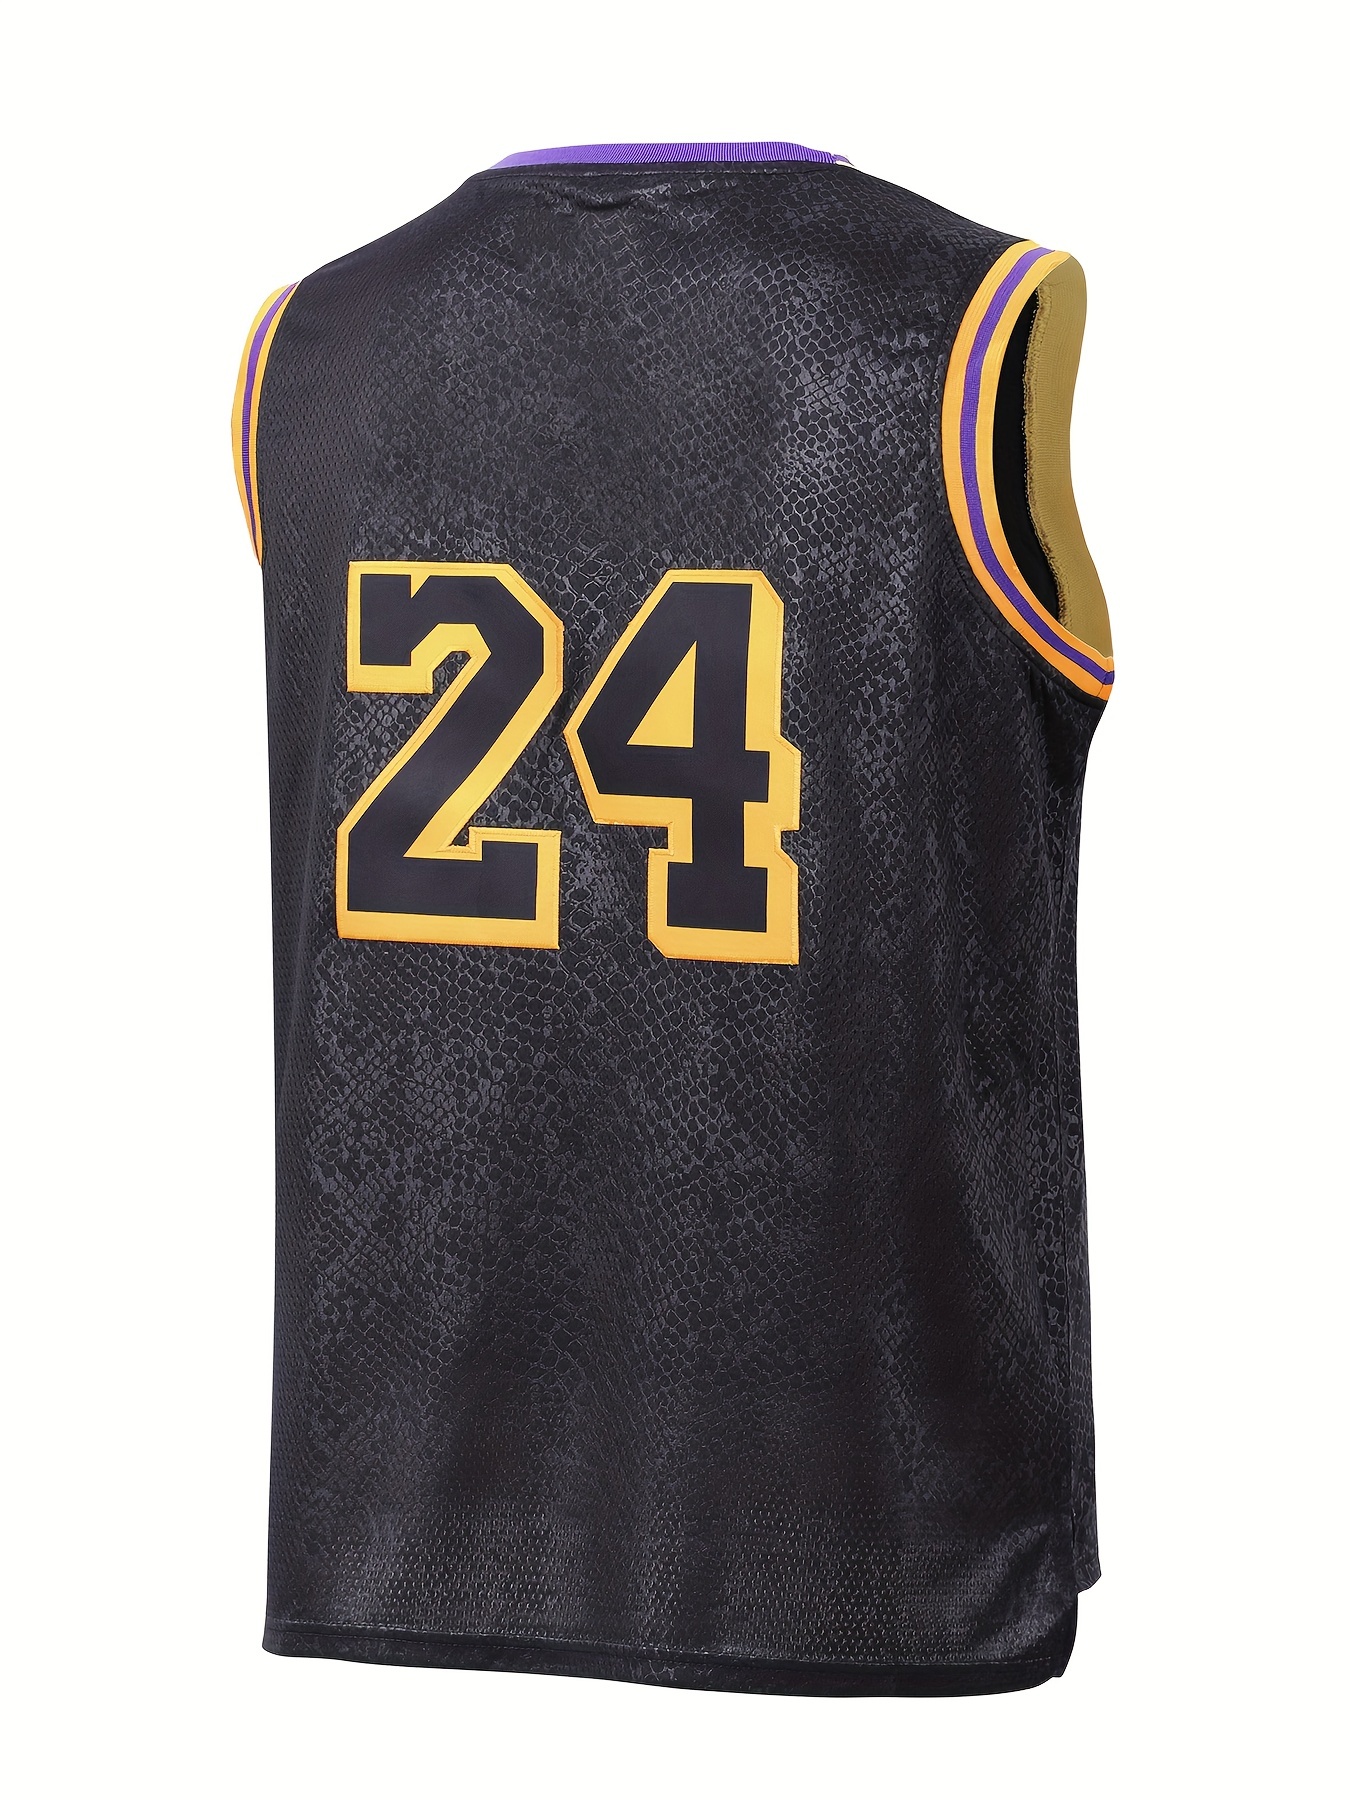 Men's Embroidered Basketball Jersey - Black, Casual Fashion, #8 On